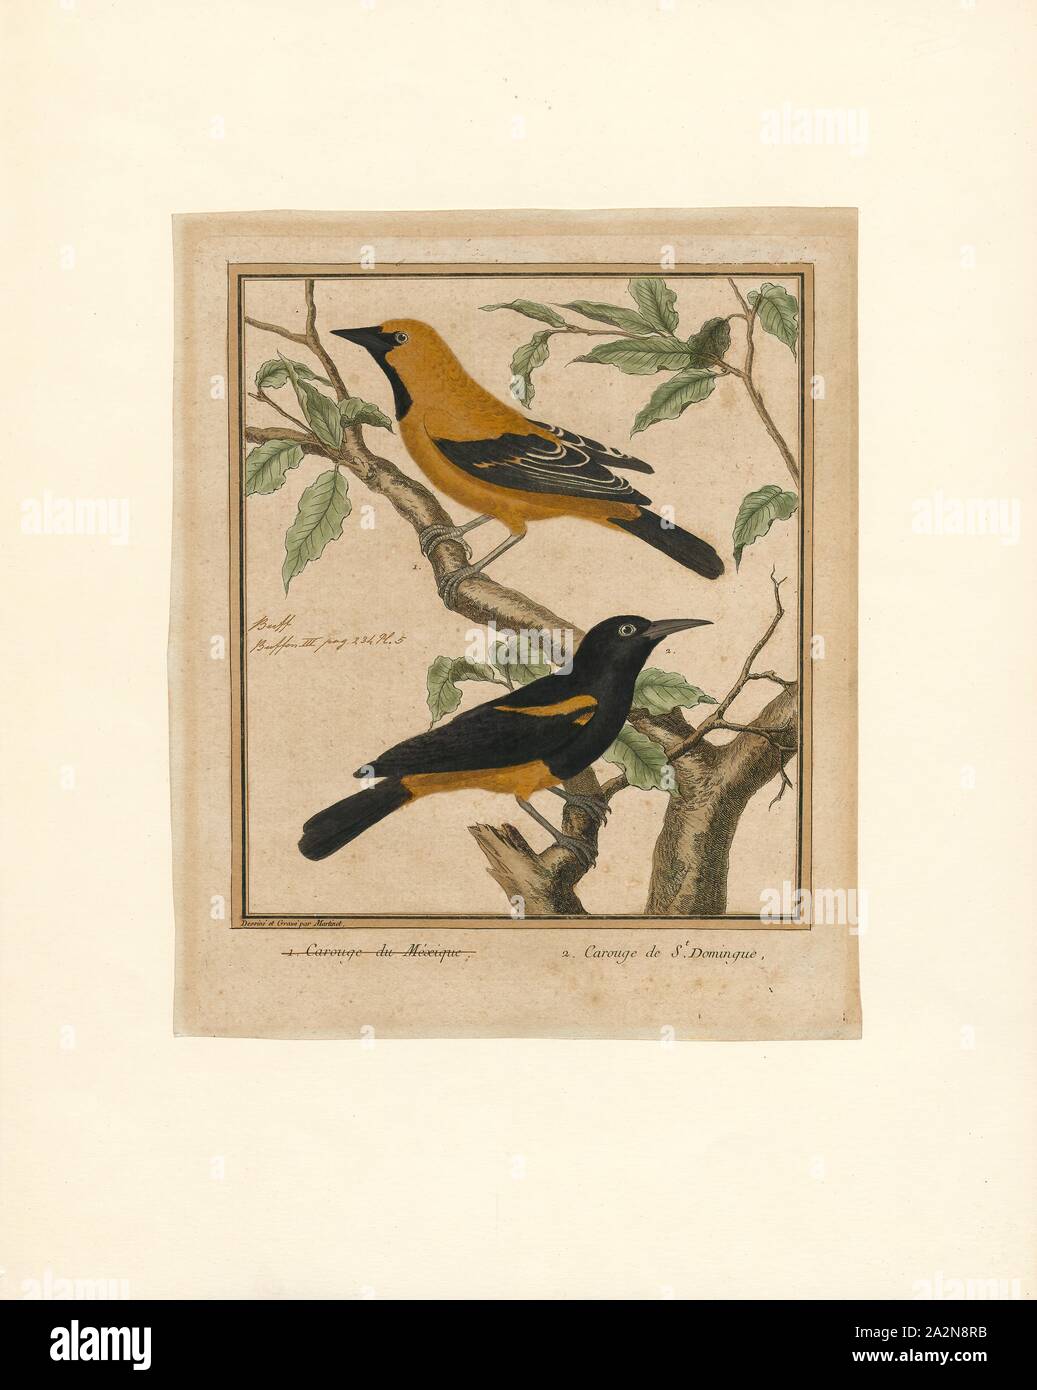 Oriolus linnaei, Print, Orioles are colourful Old World passerine birds in the genus Oriolus, the namesake of the corvoidean family Oriolidae. They are not related to the New World orioles, which are icterids (family Icteridae) that belong to the superfamily Passeroidea., 1796-1799 Stock Photo